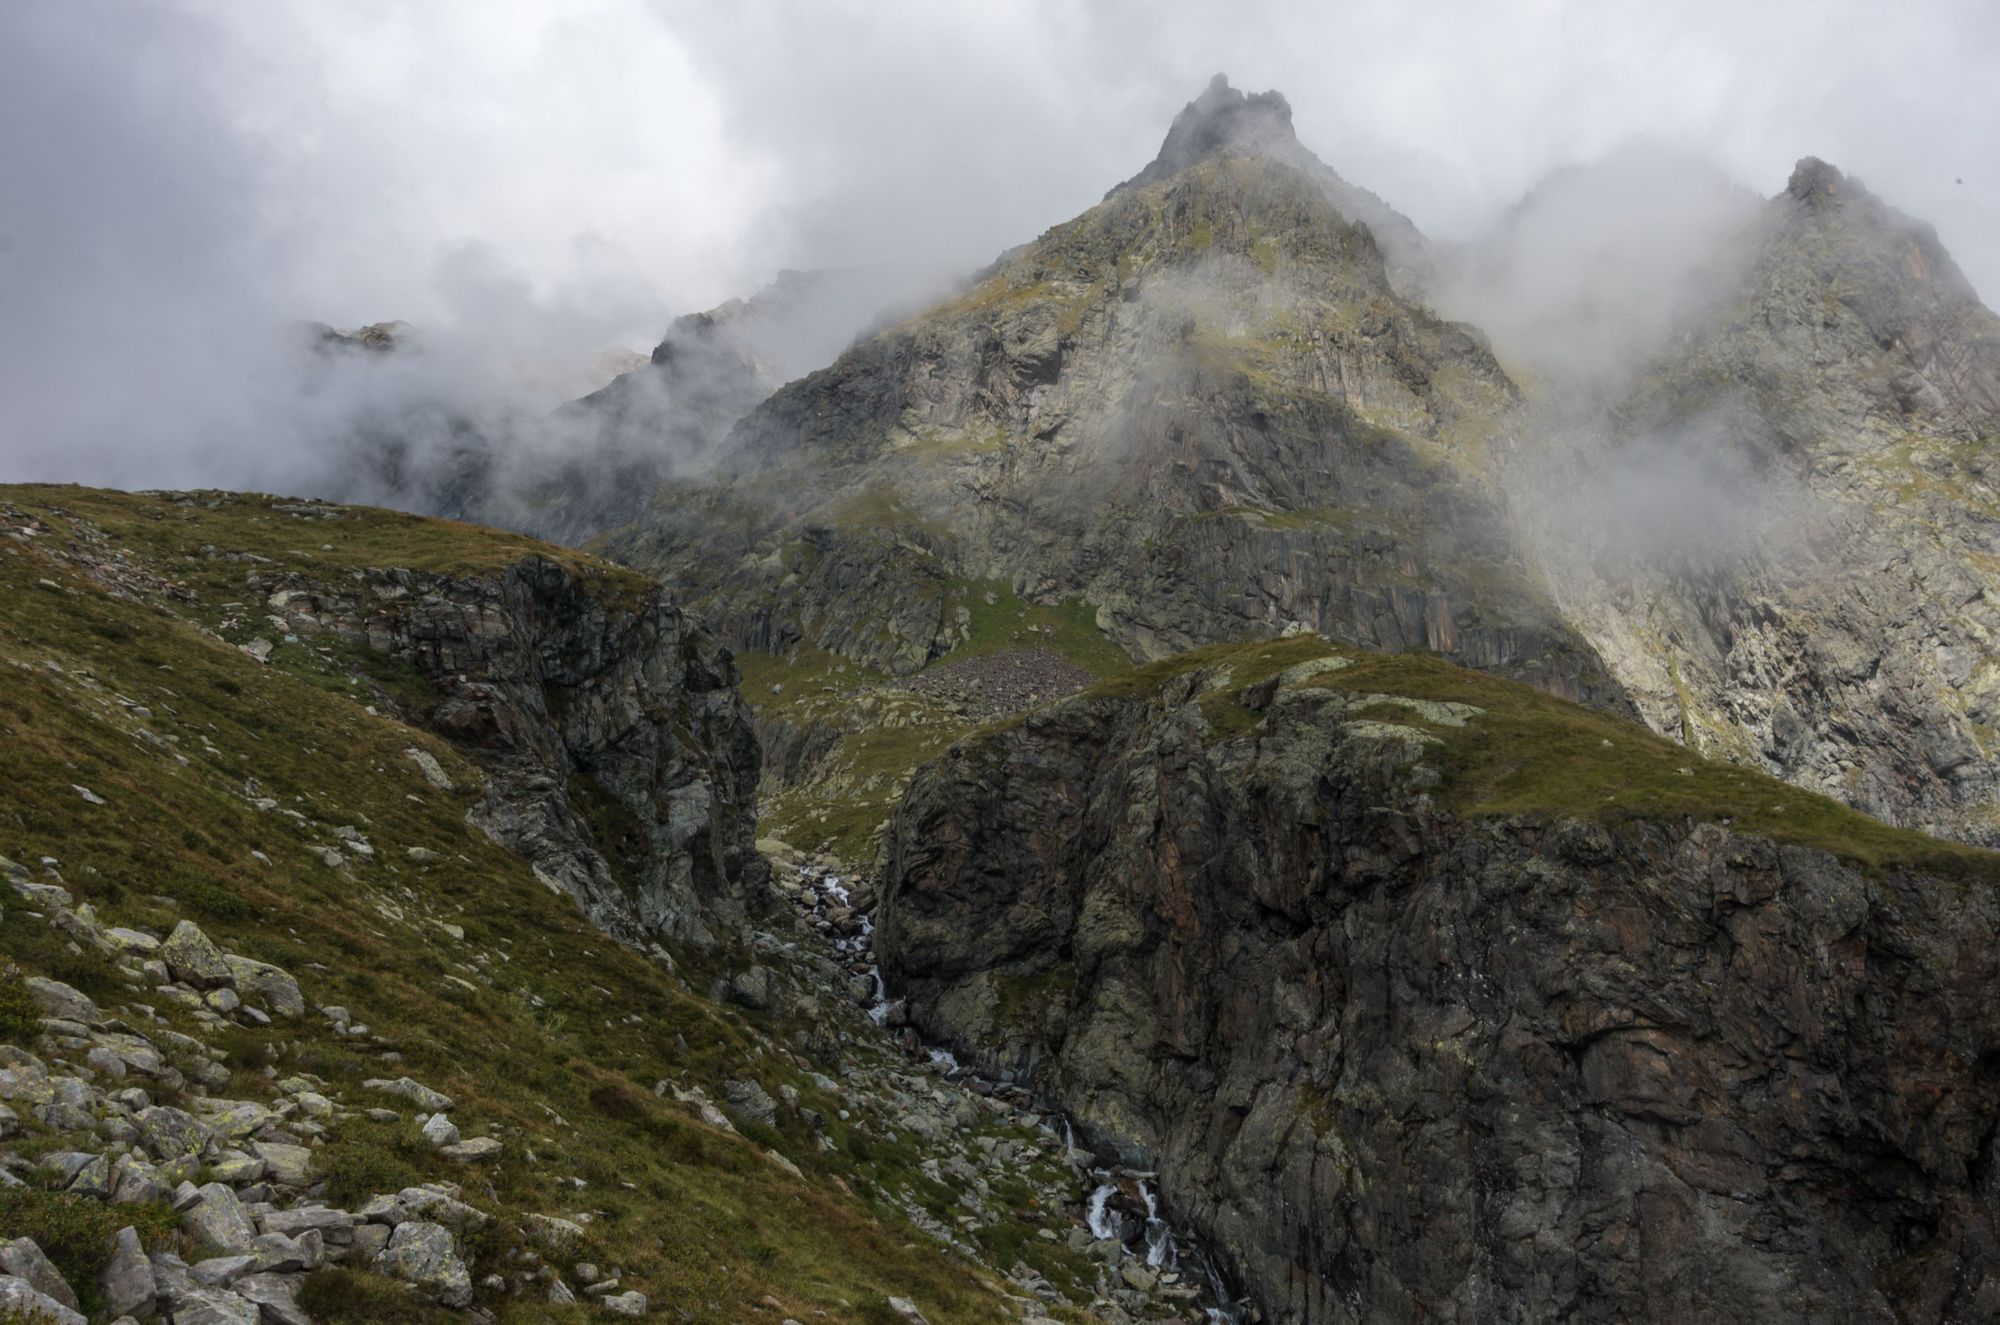 The Highland landscape in the Alps, above Alagna Valsesia. Photo: Getty